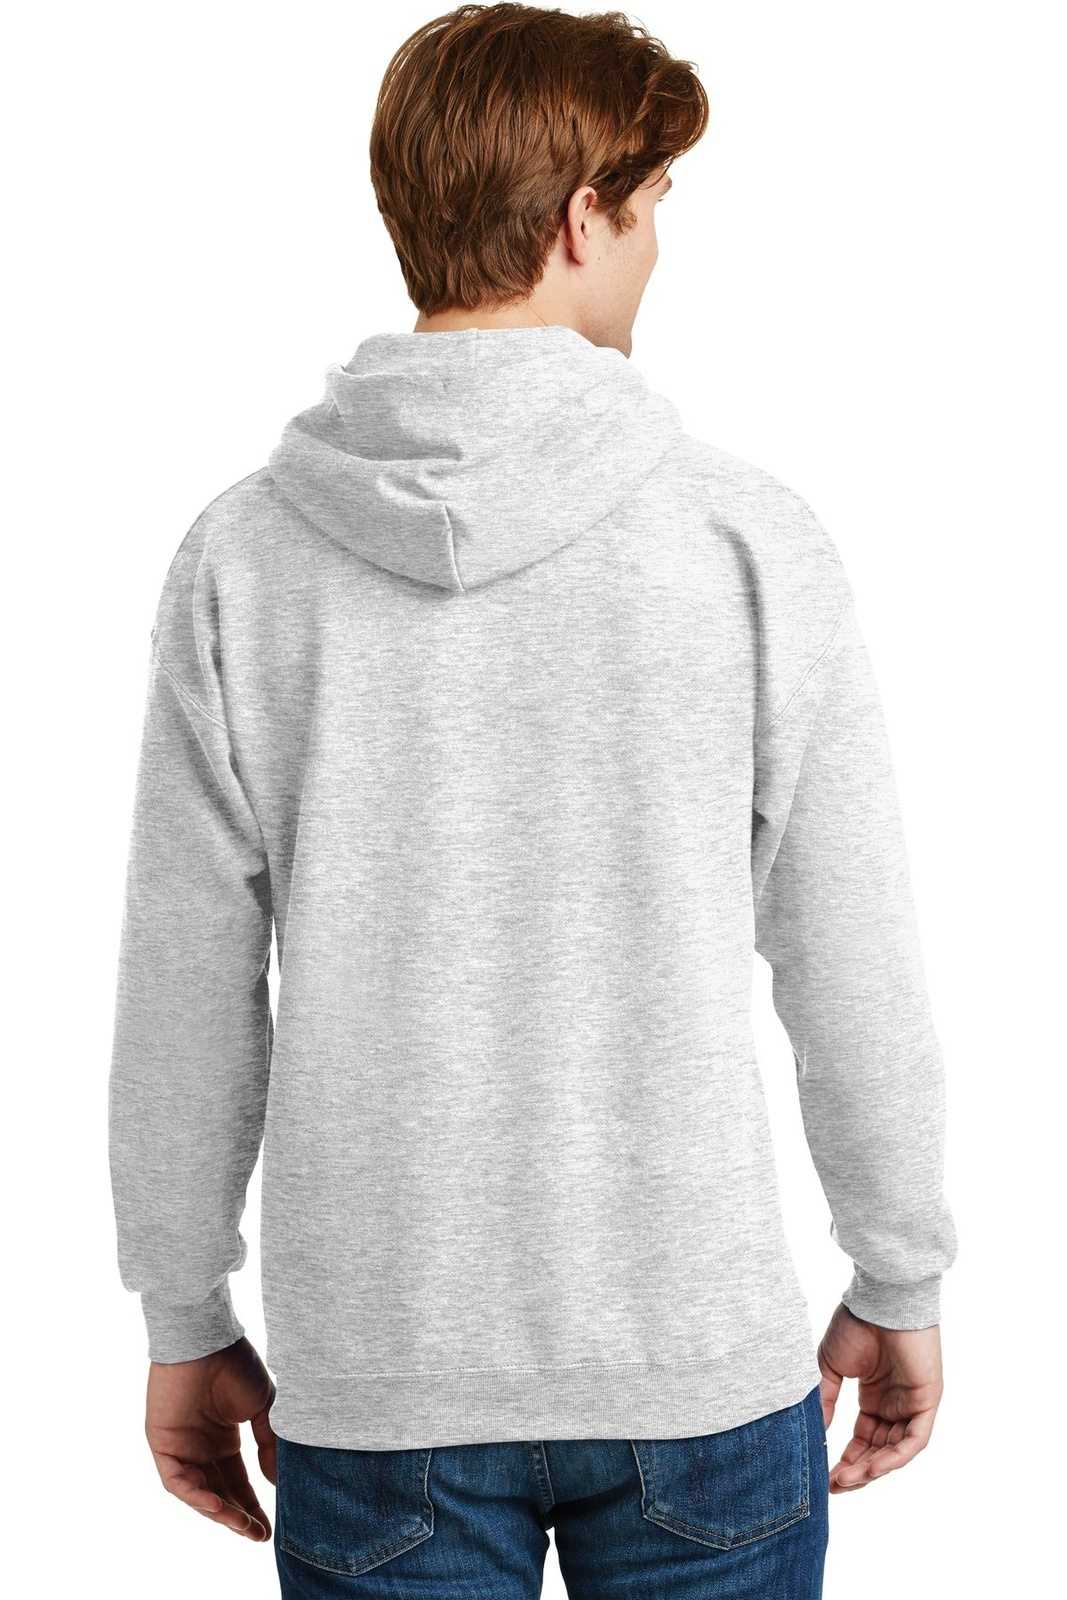 Hanes F170 Ultimate Cotton Pullover Hooded Sweatshirt - Ash - HIT a Double